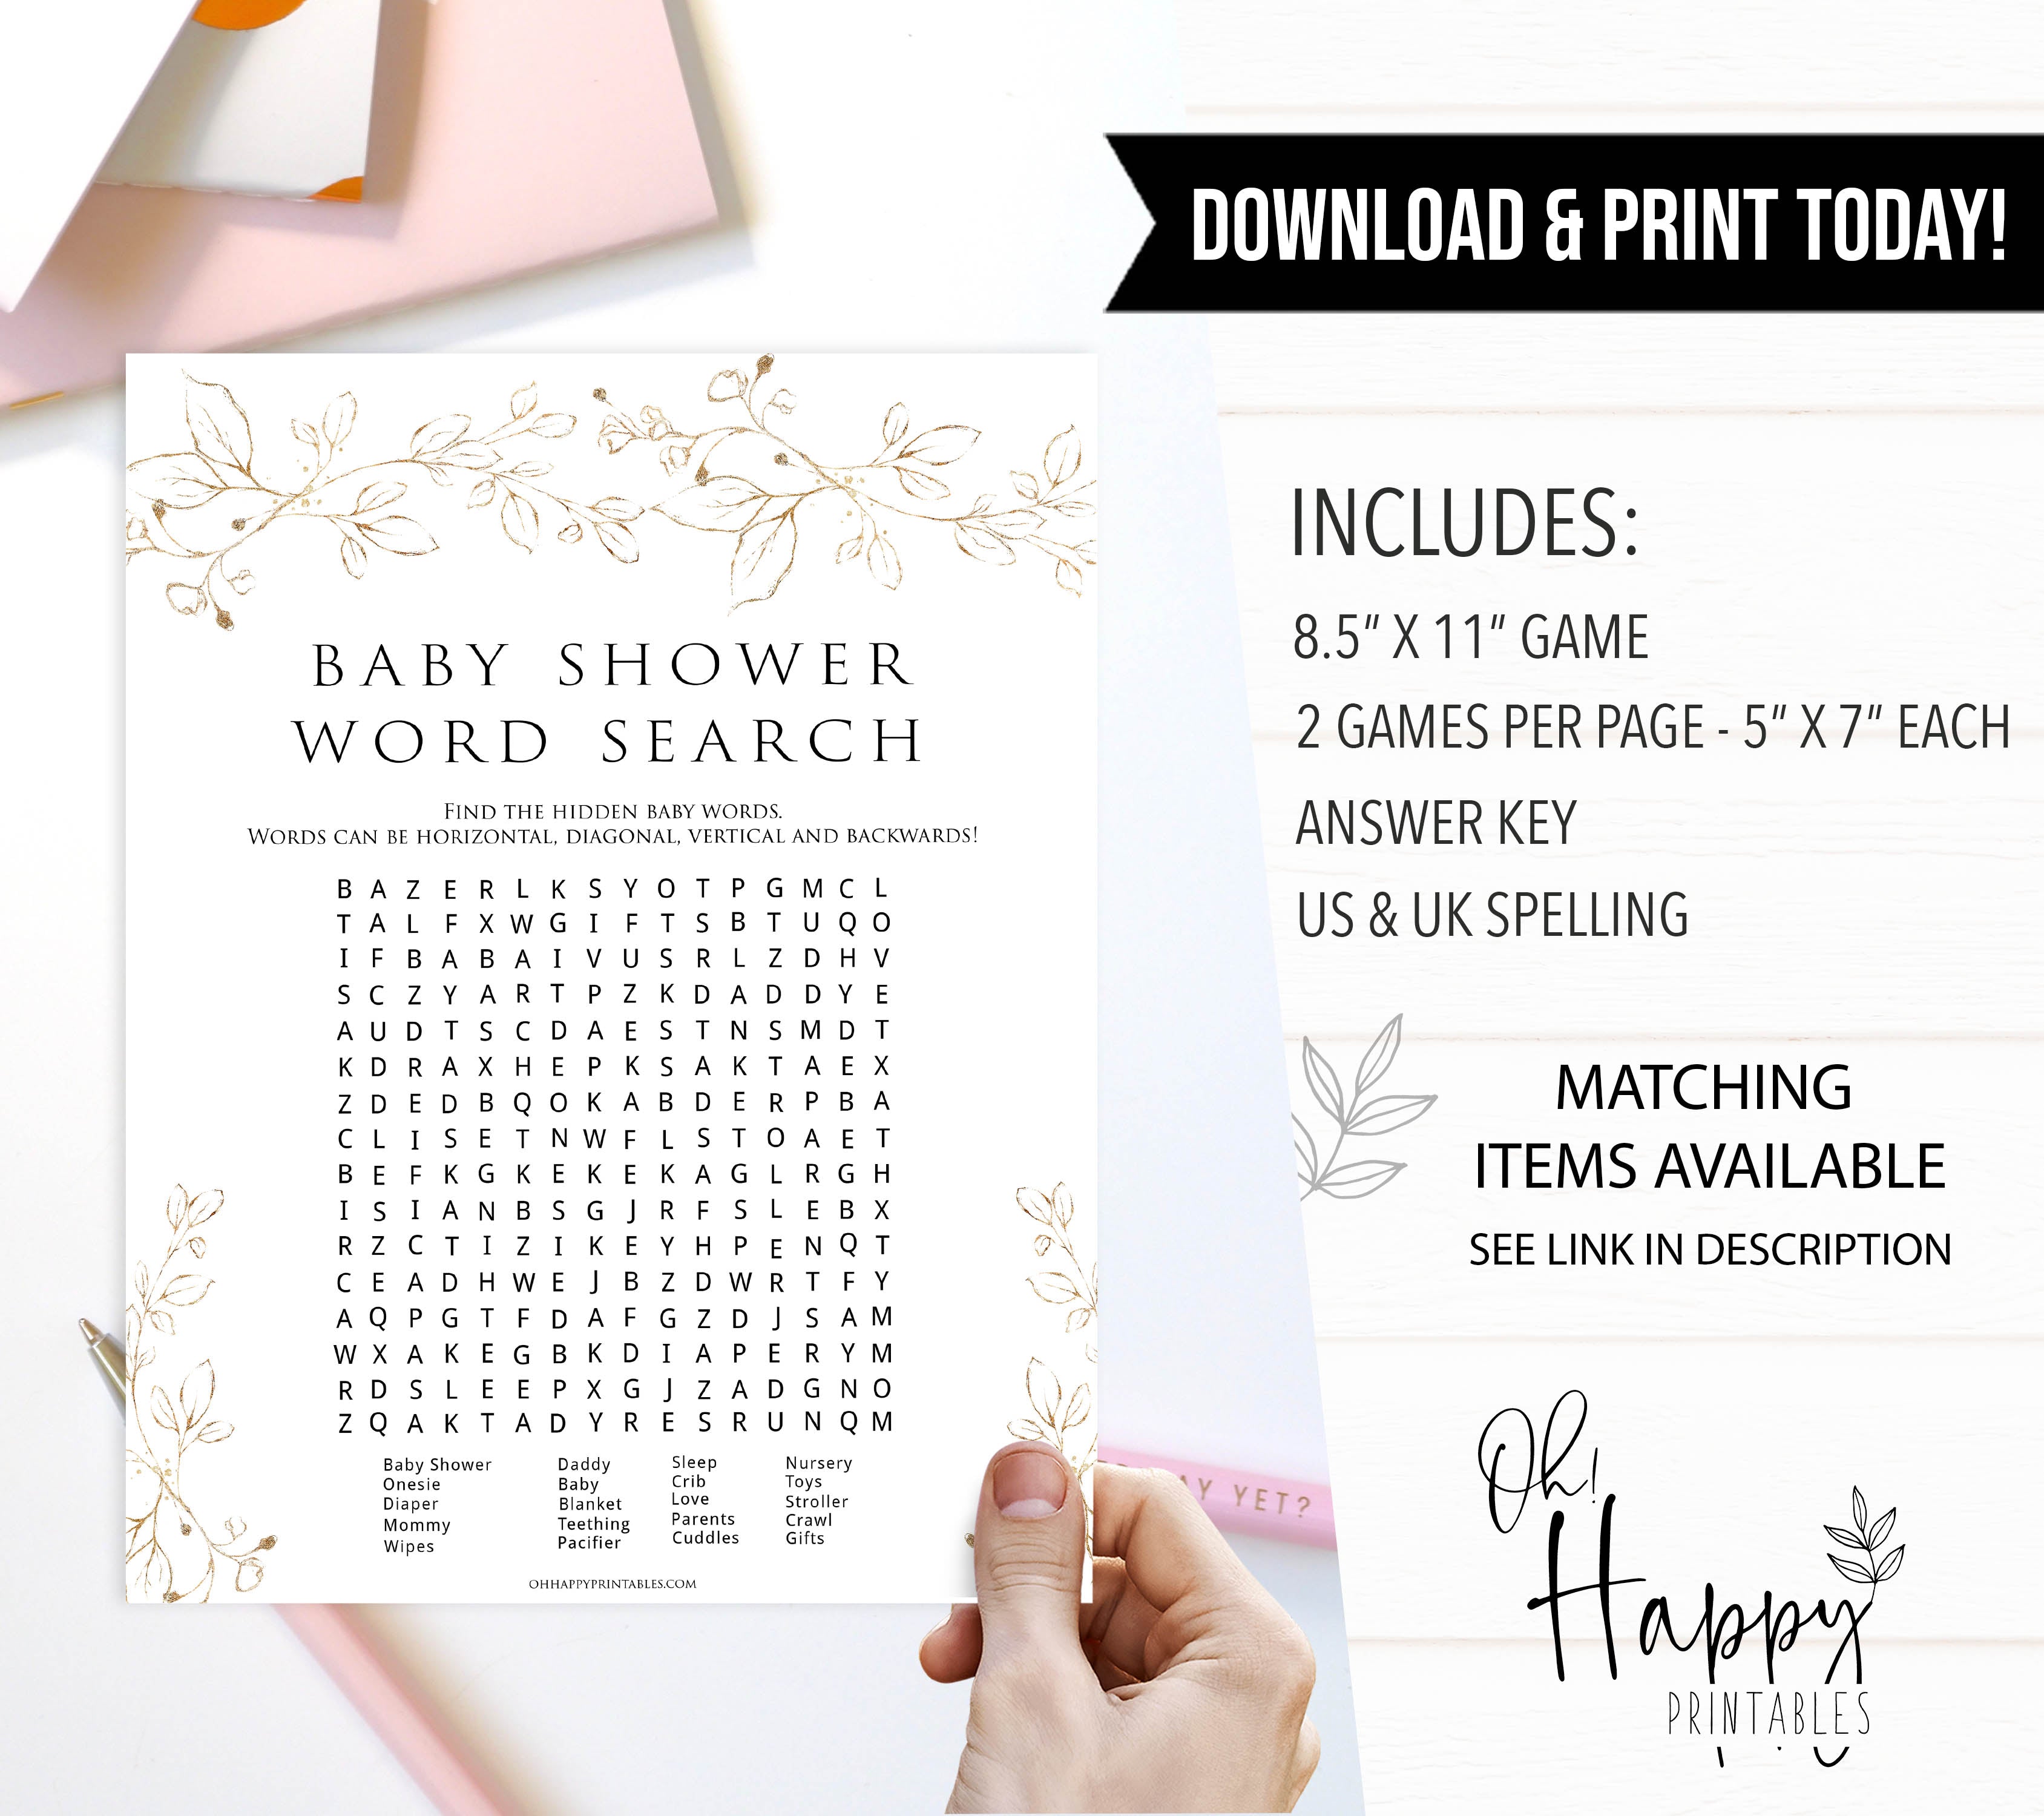 baby shower word search game, Printable baby shower games, gold leaf baby games, baby shower games, fun baby shower ideas, top baby shower ideas, gold leaf baby shower, baby shower games, fun gold leaf baby shower ideas